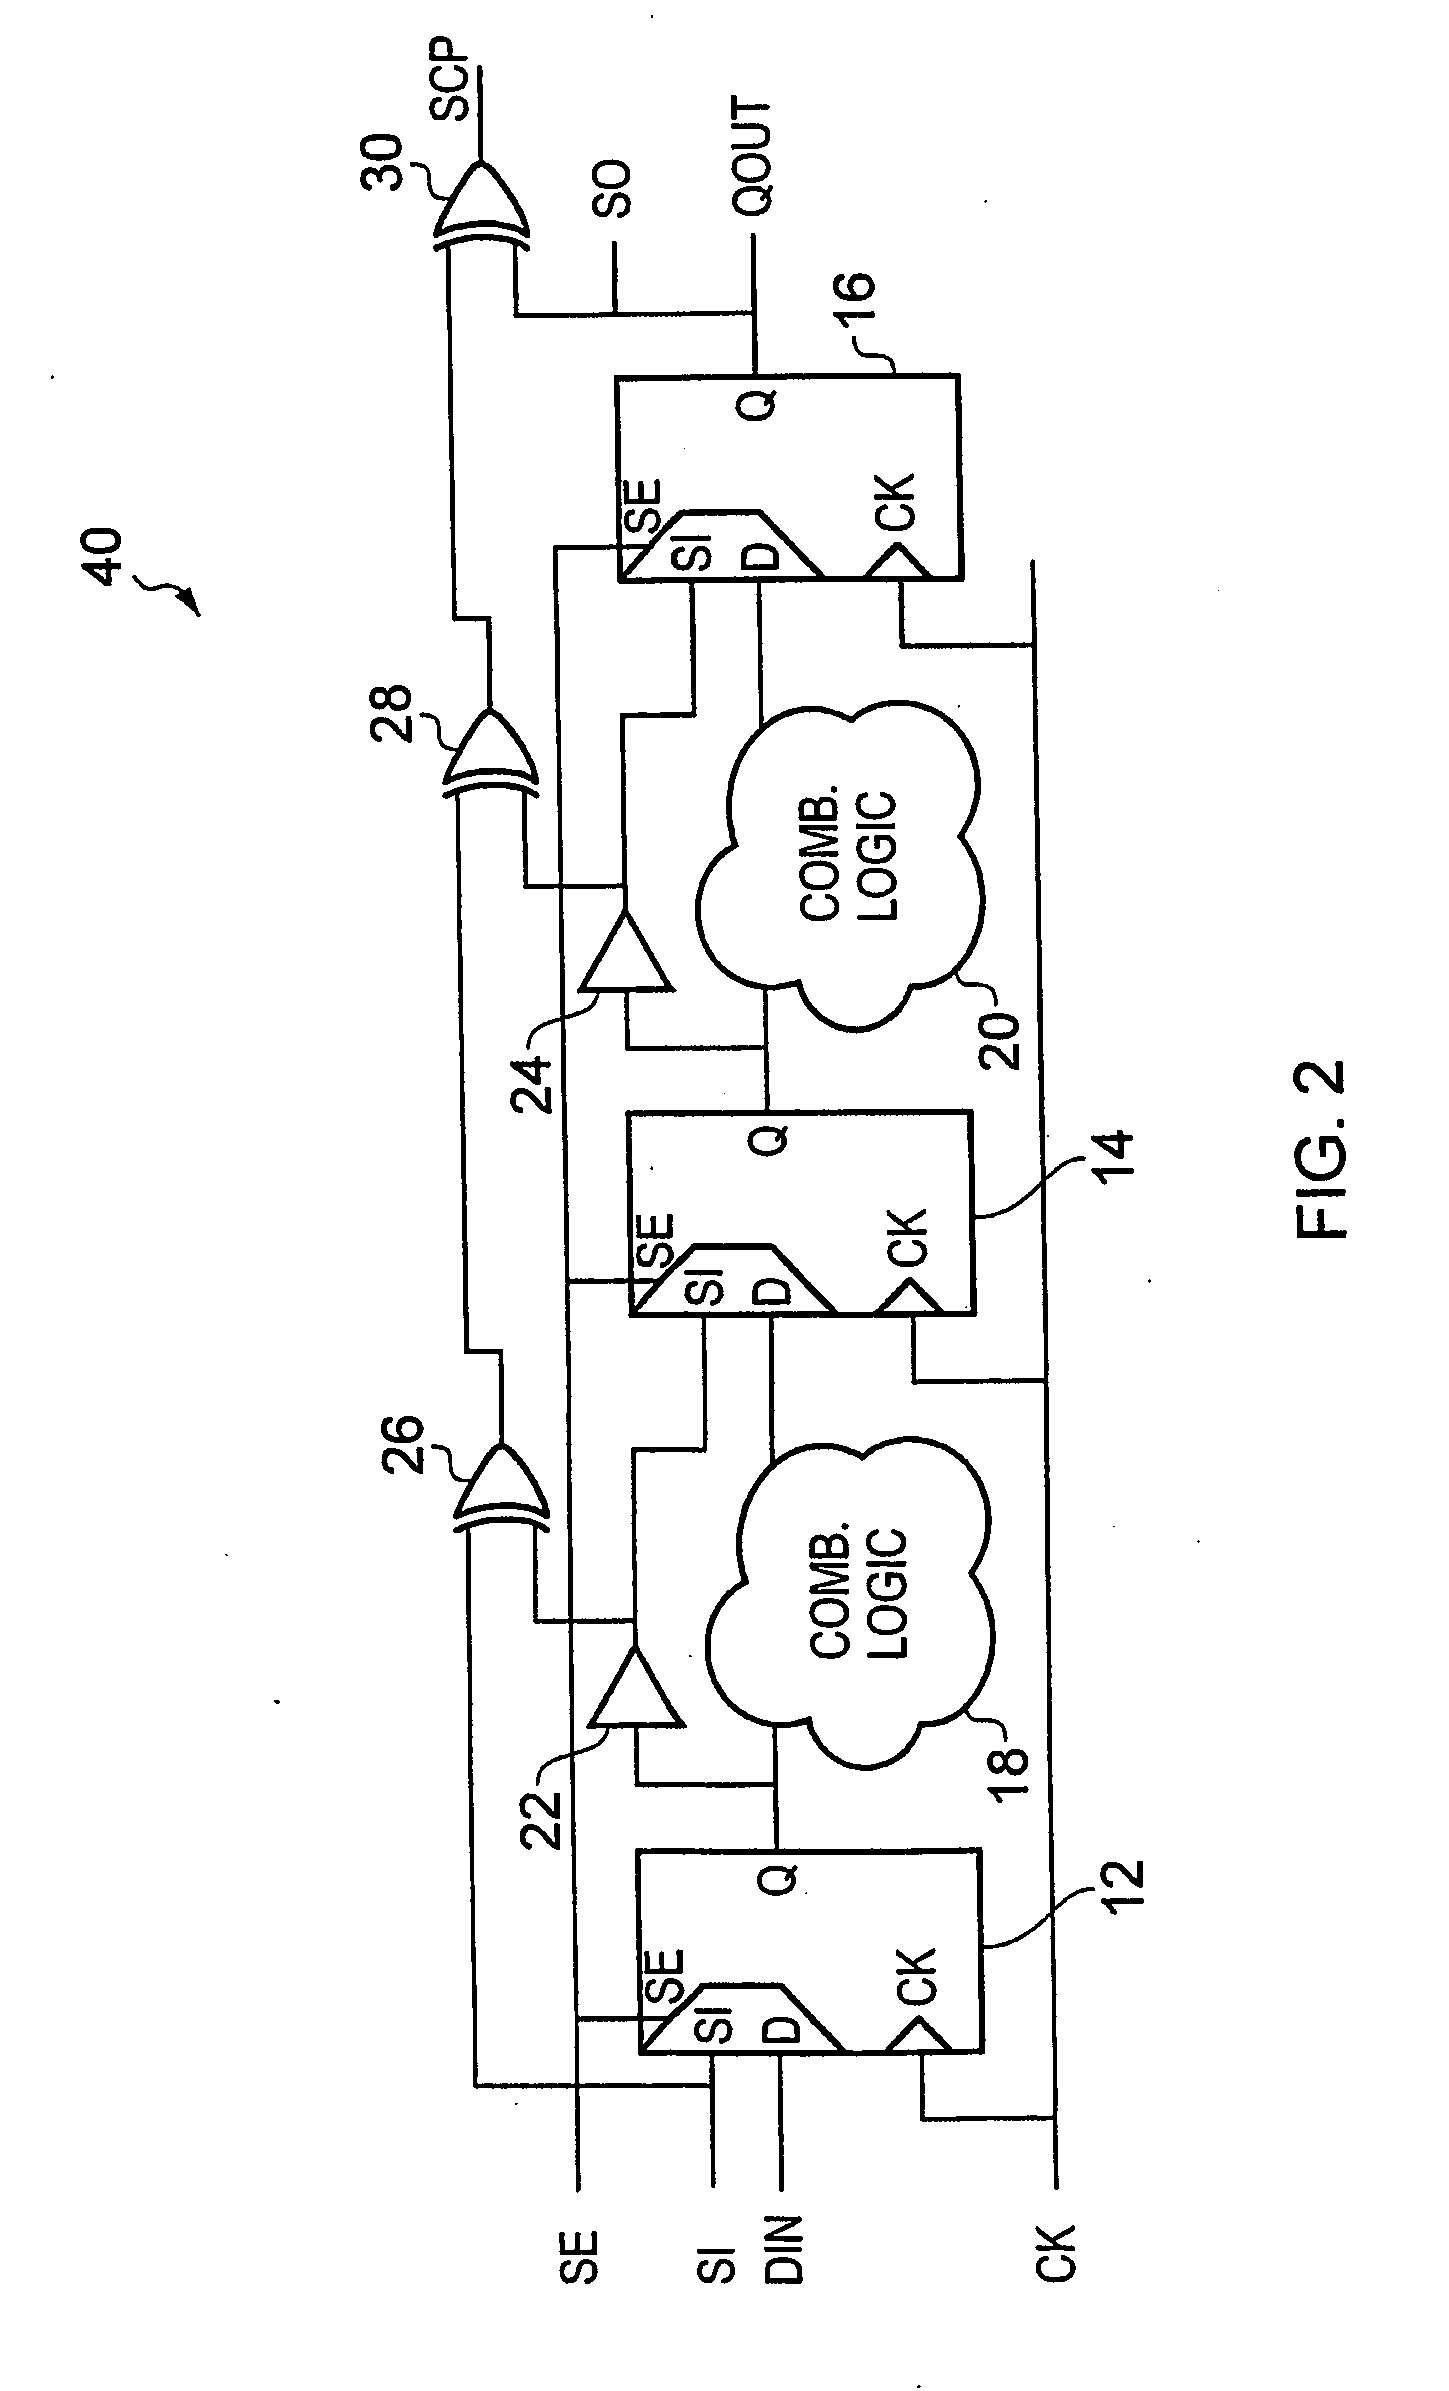 Verifying state integrity in state retention circuits